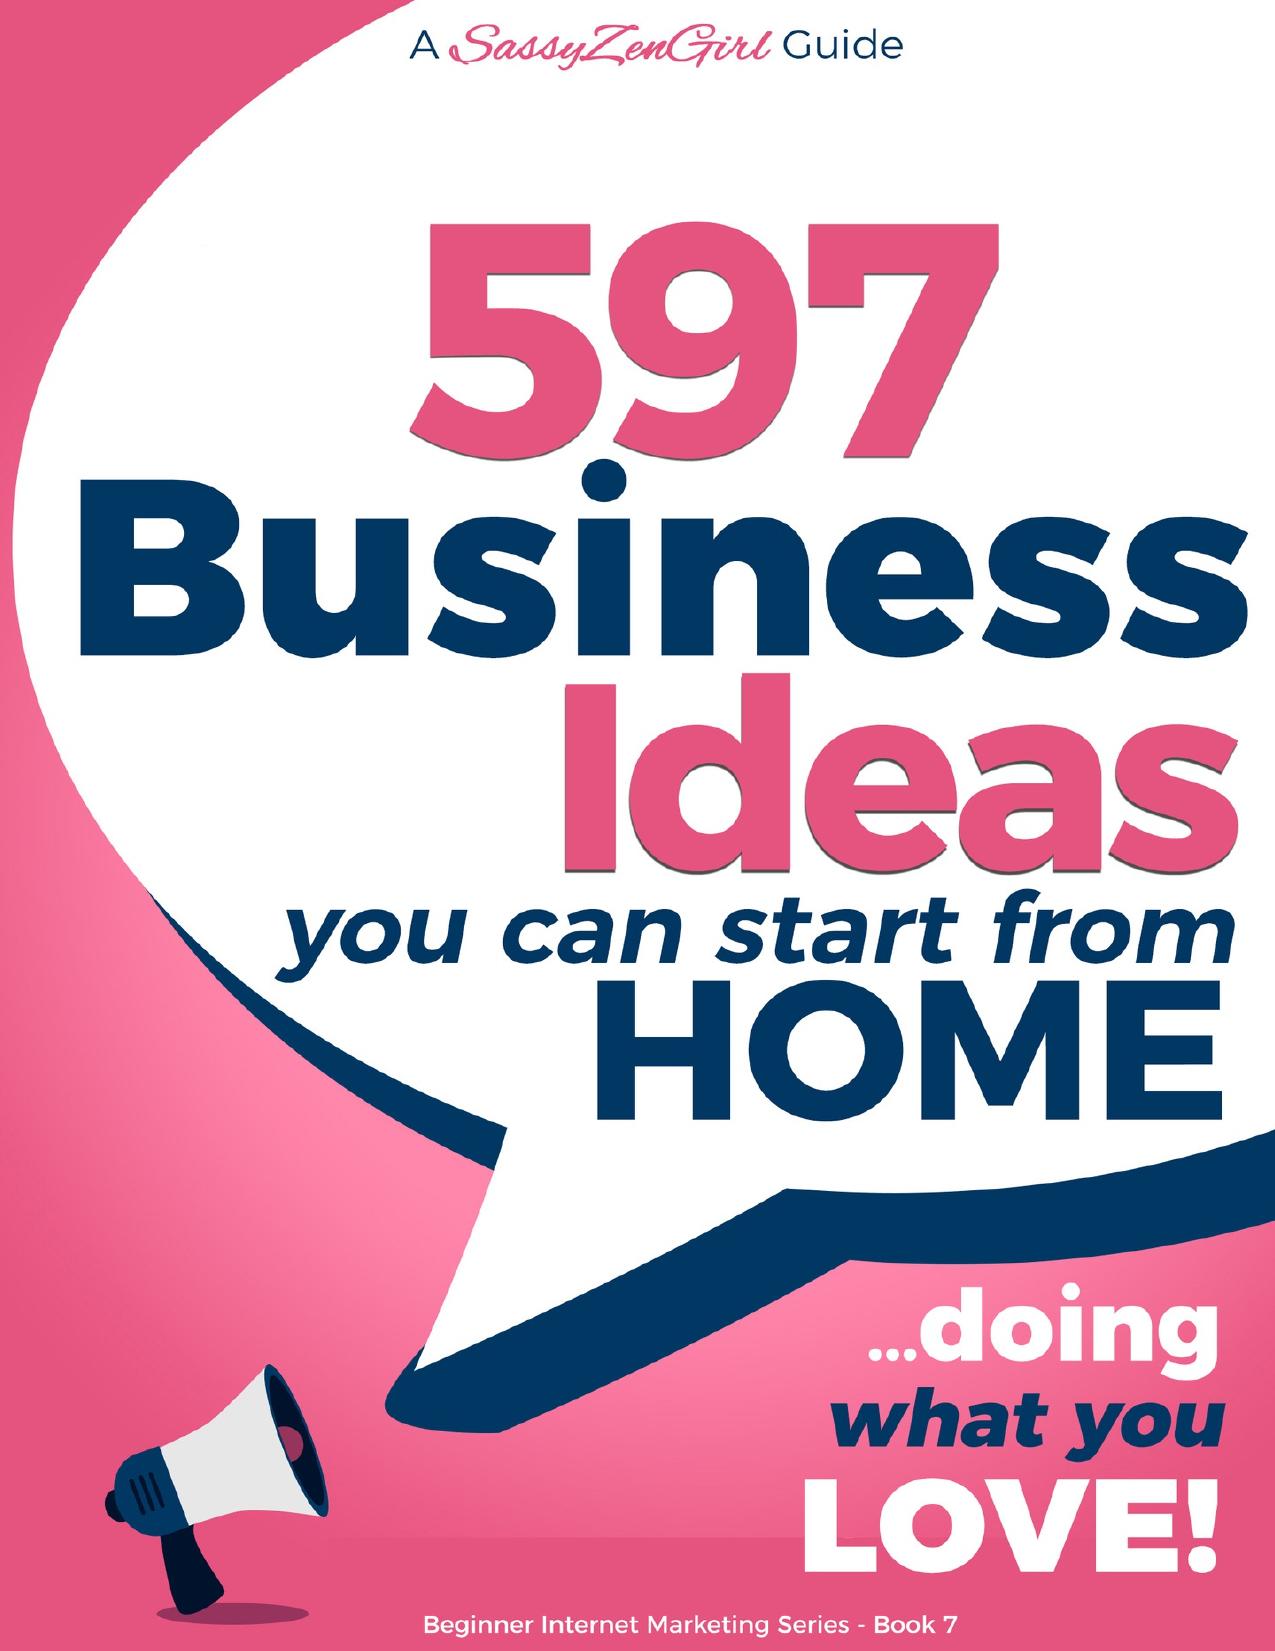 597 Business Ideas You can Start from Home - doing what you LOVE! (Beginner Internet Marketing Series)